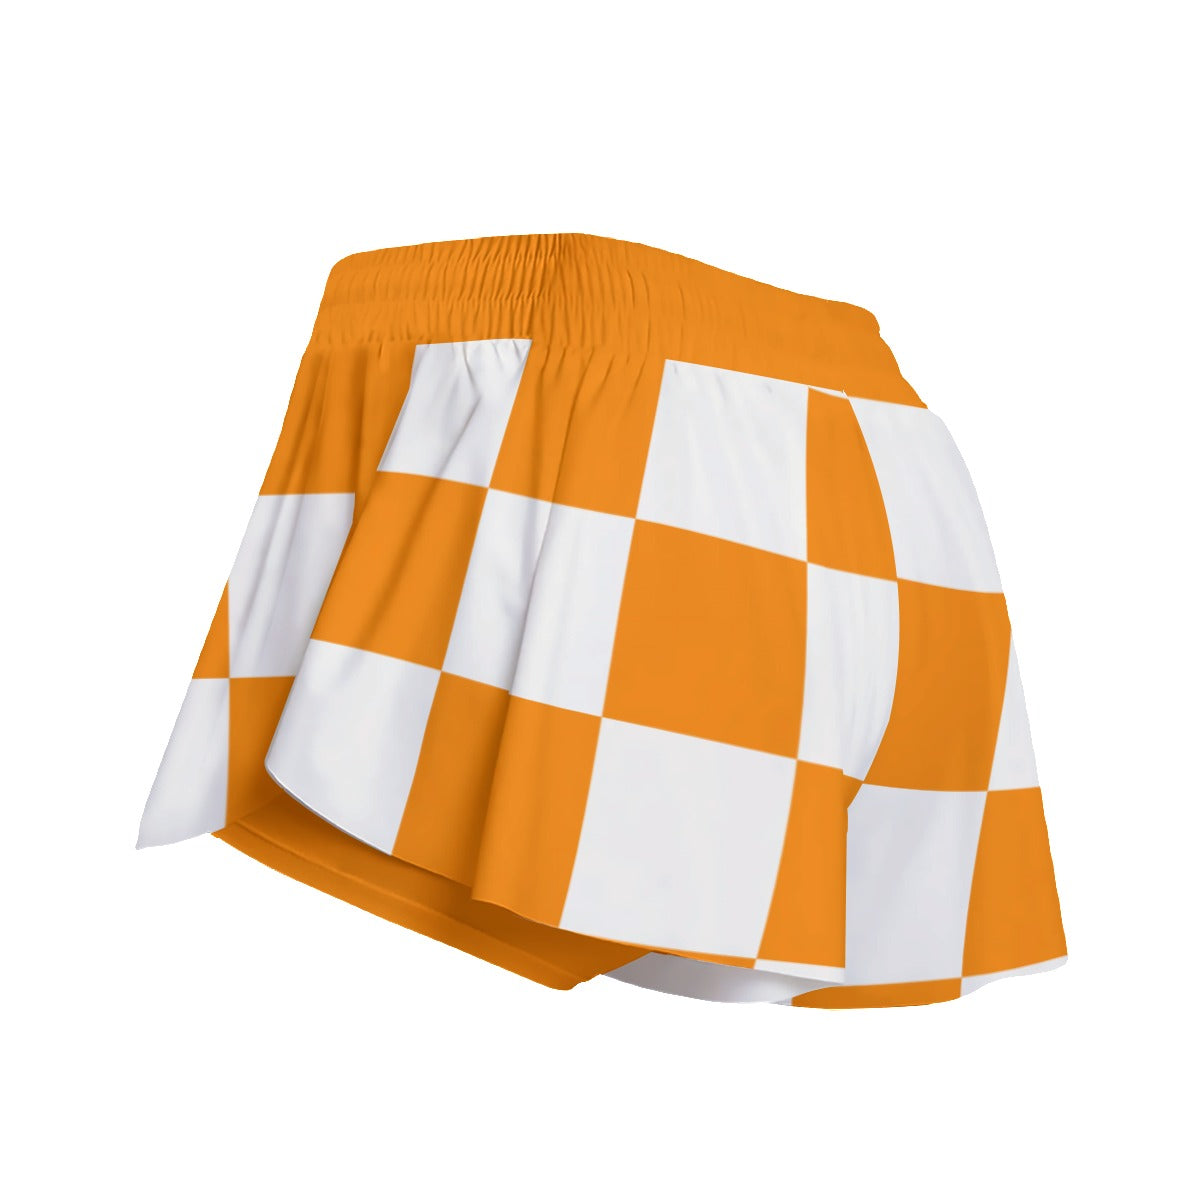 Checkerboard Women's Sport Skirt With Pockets